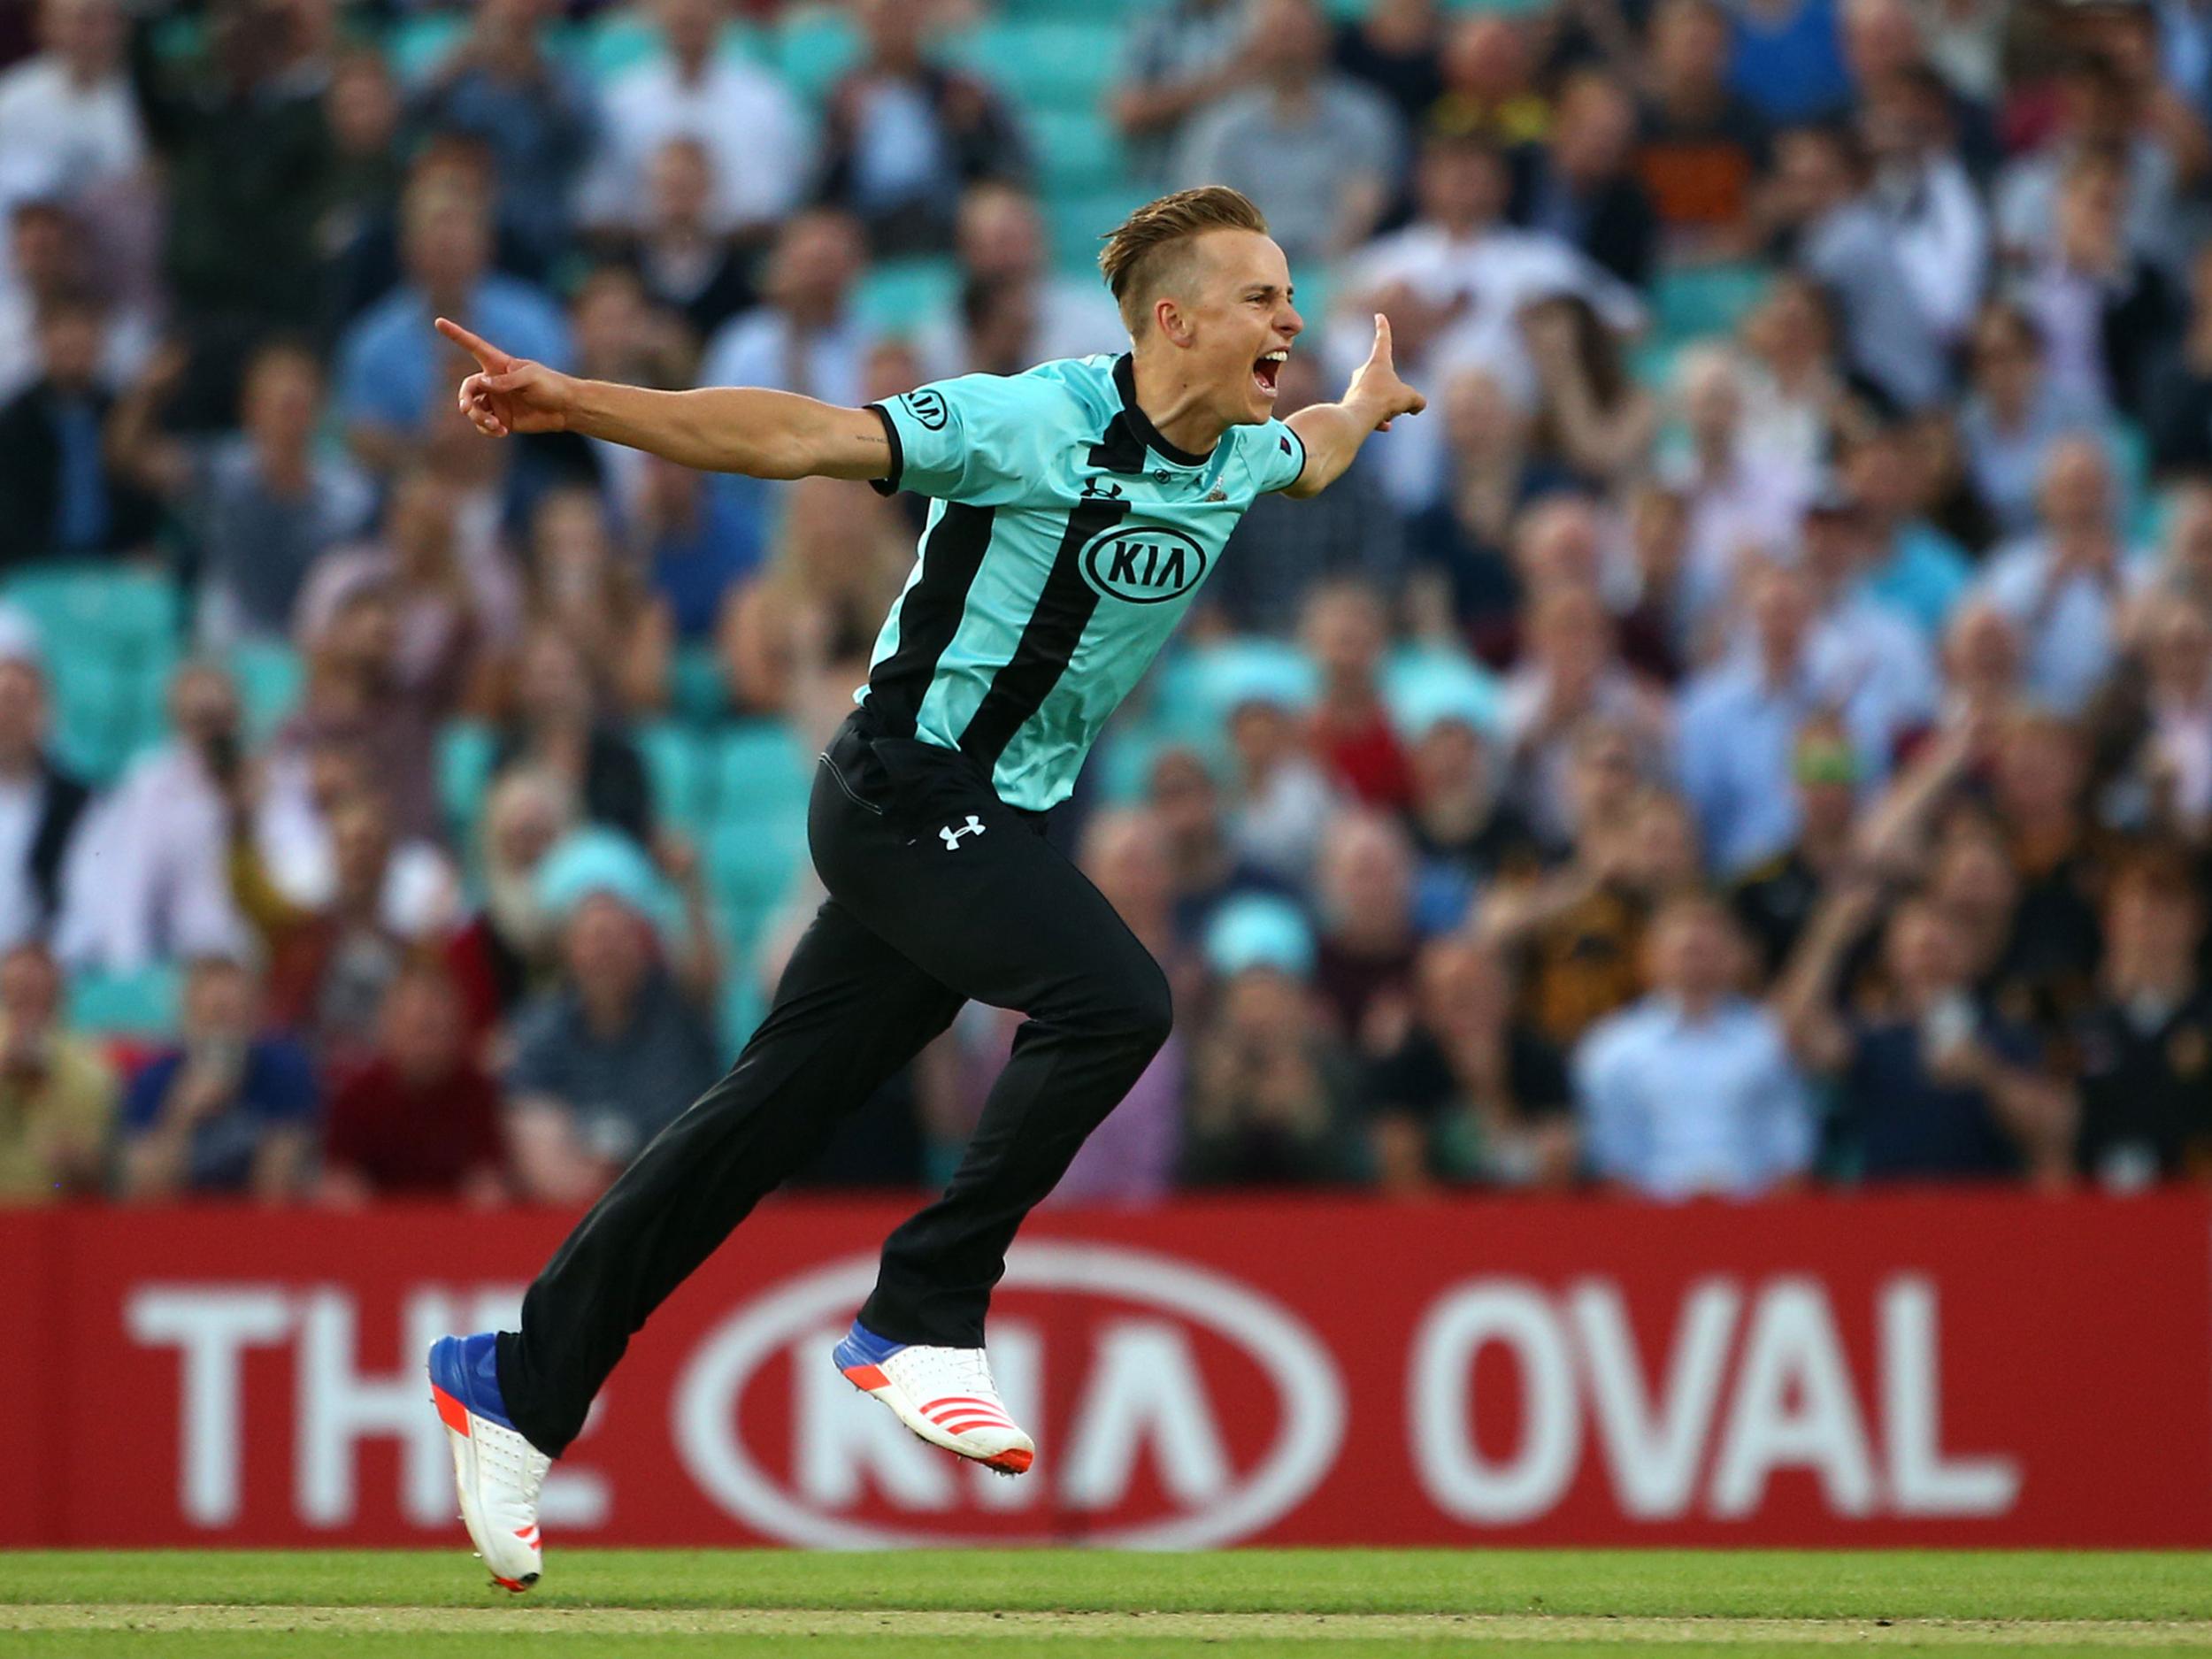 Tom Curran in action for Surrey, where he and his brother are the latest talented youngsters on the scene